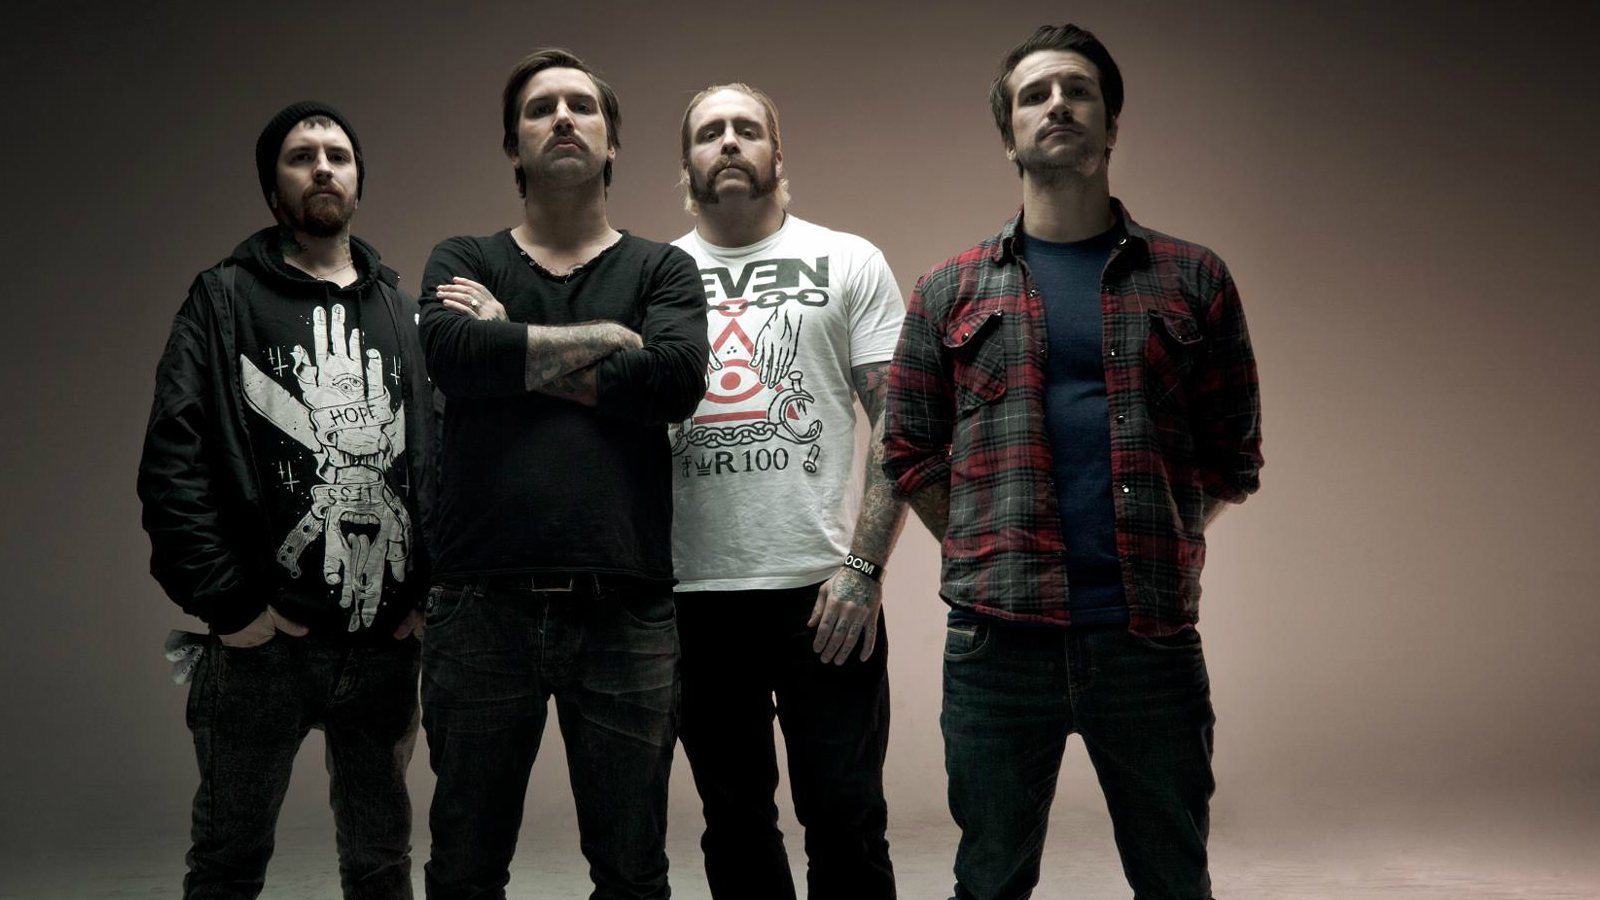 Every time. Everytime i die группа. Every time i die Band. Everytime i die гитарист. Every time i die logoешз.